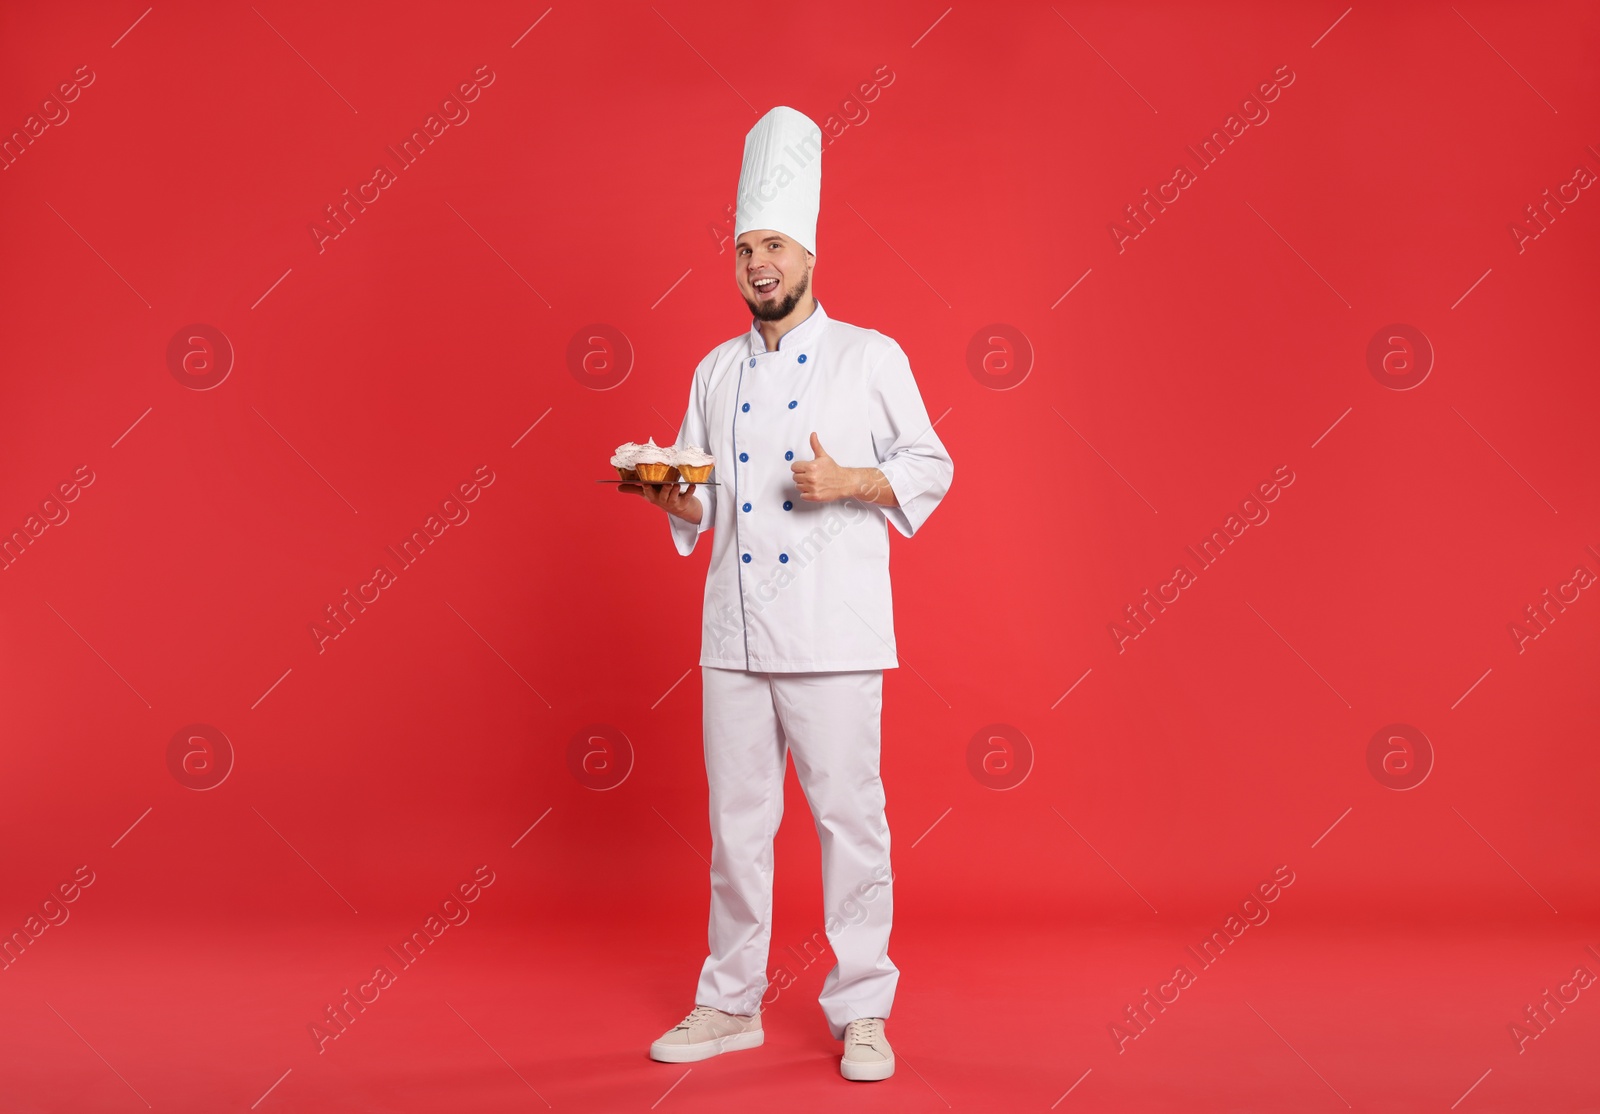 Photo of Happy professional confectioner in uniform holding delicious cupcakes and showing thumbs up on red background